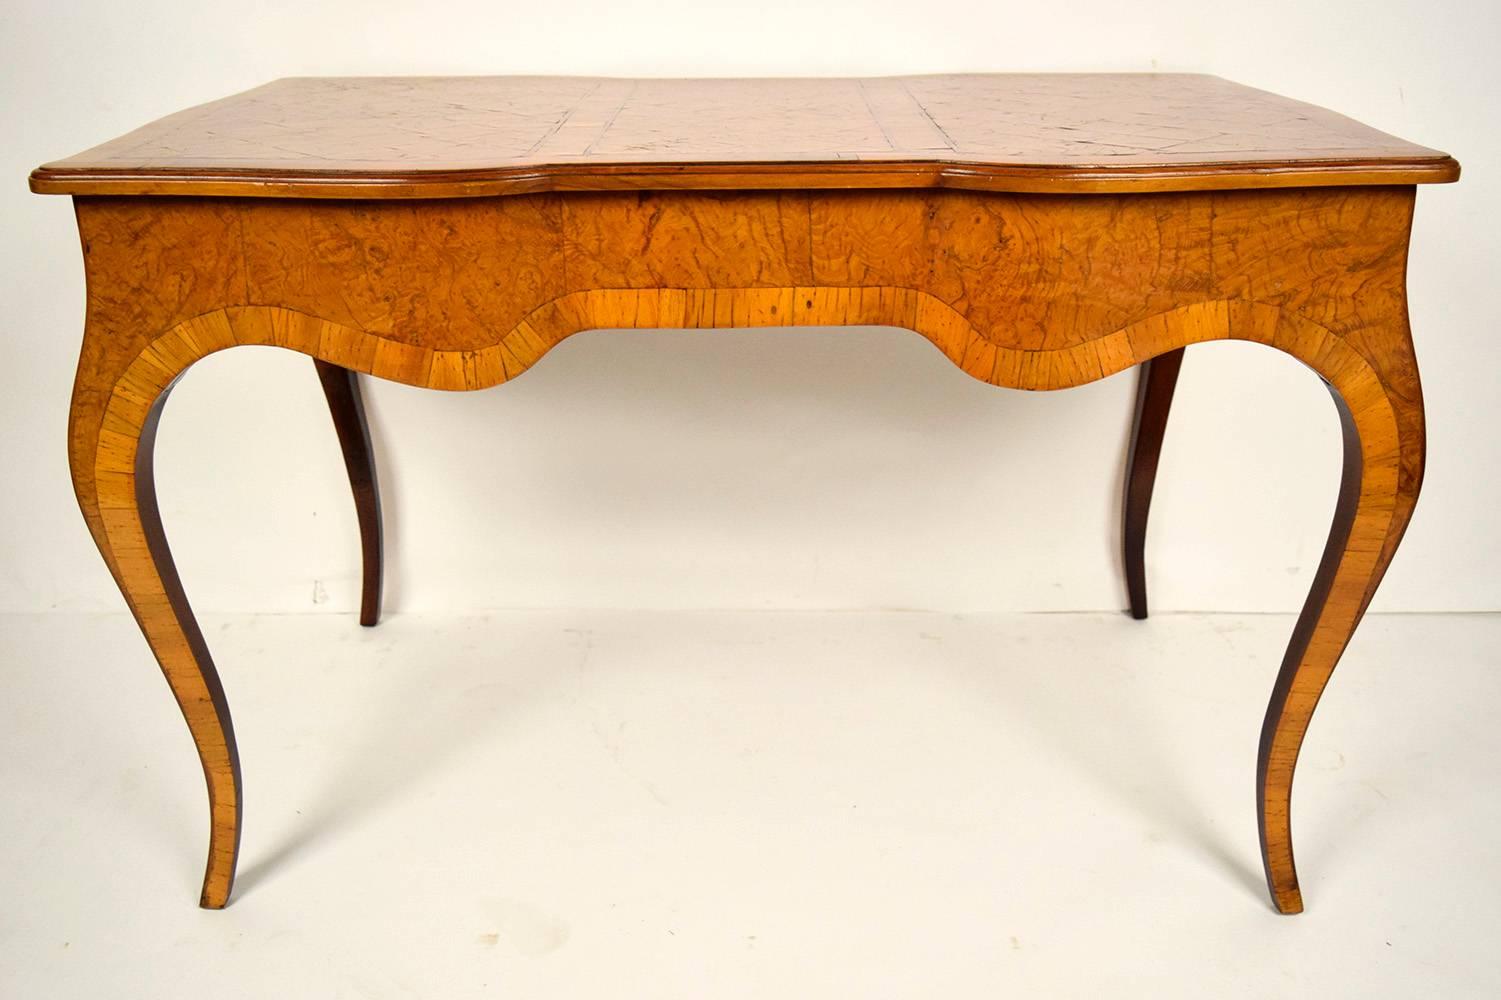 Wood Early 1900s Century Louis XV Italian Marquetry Top Desk